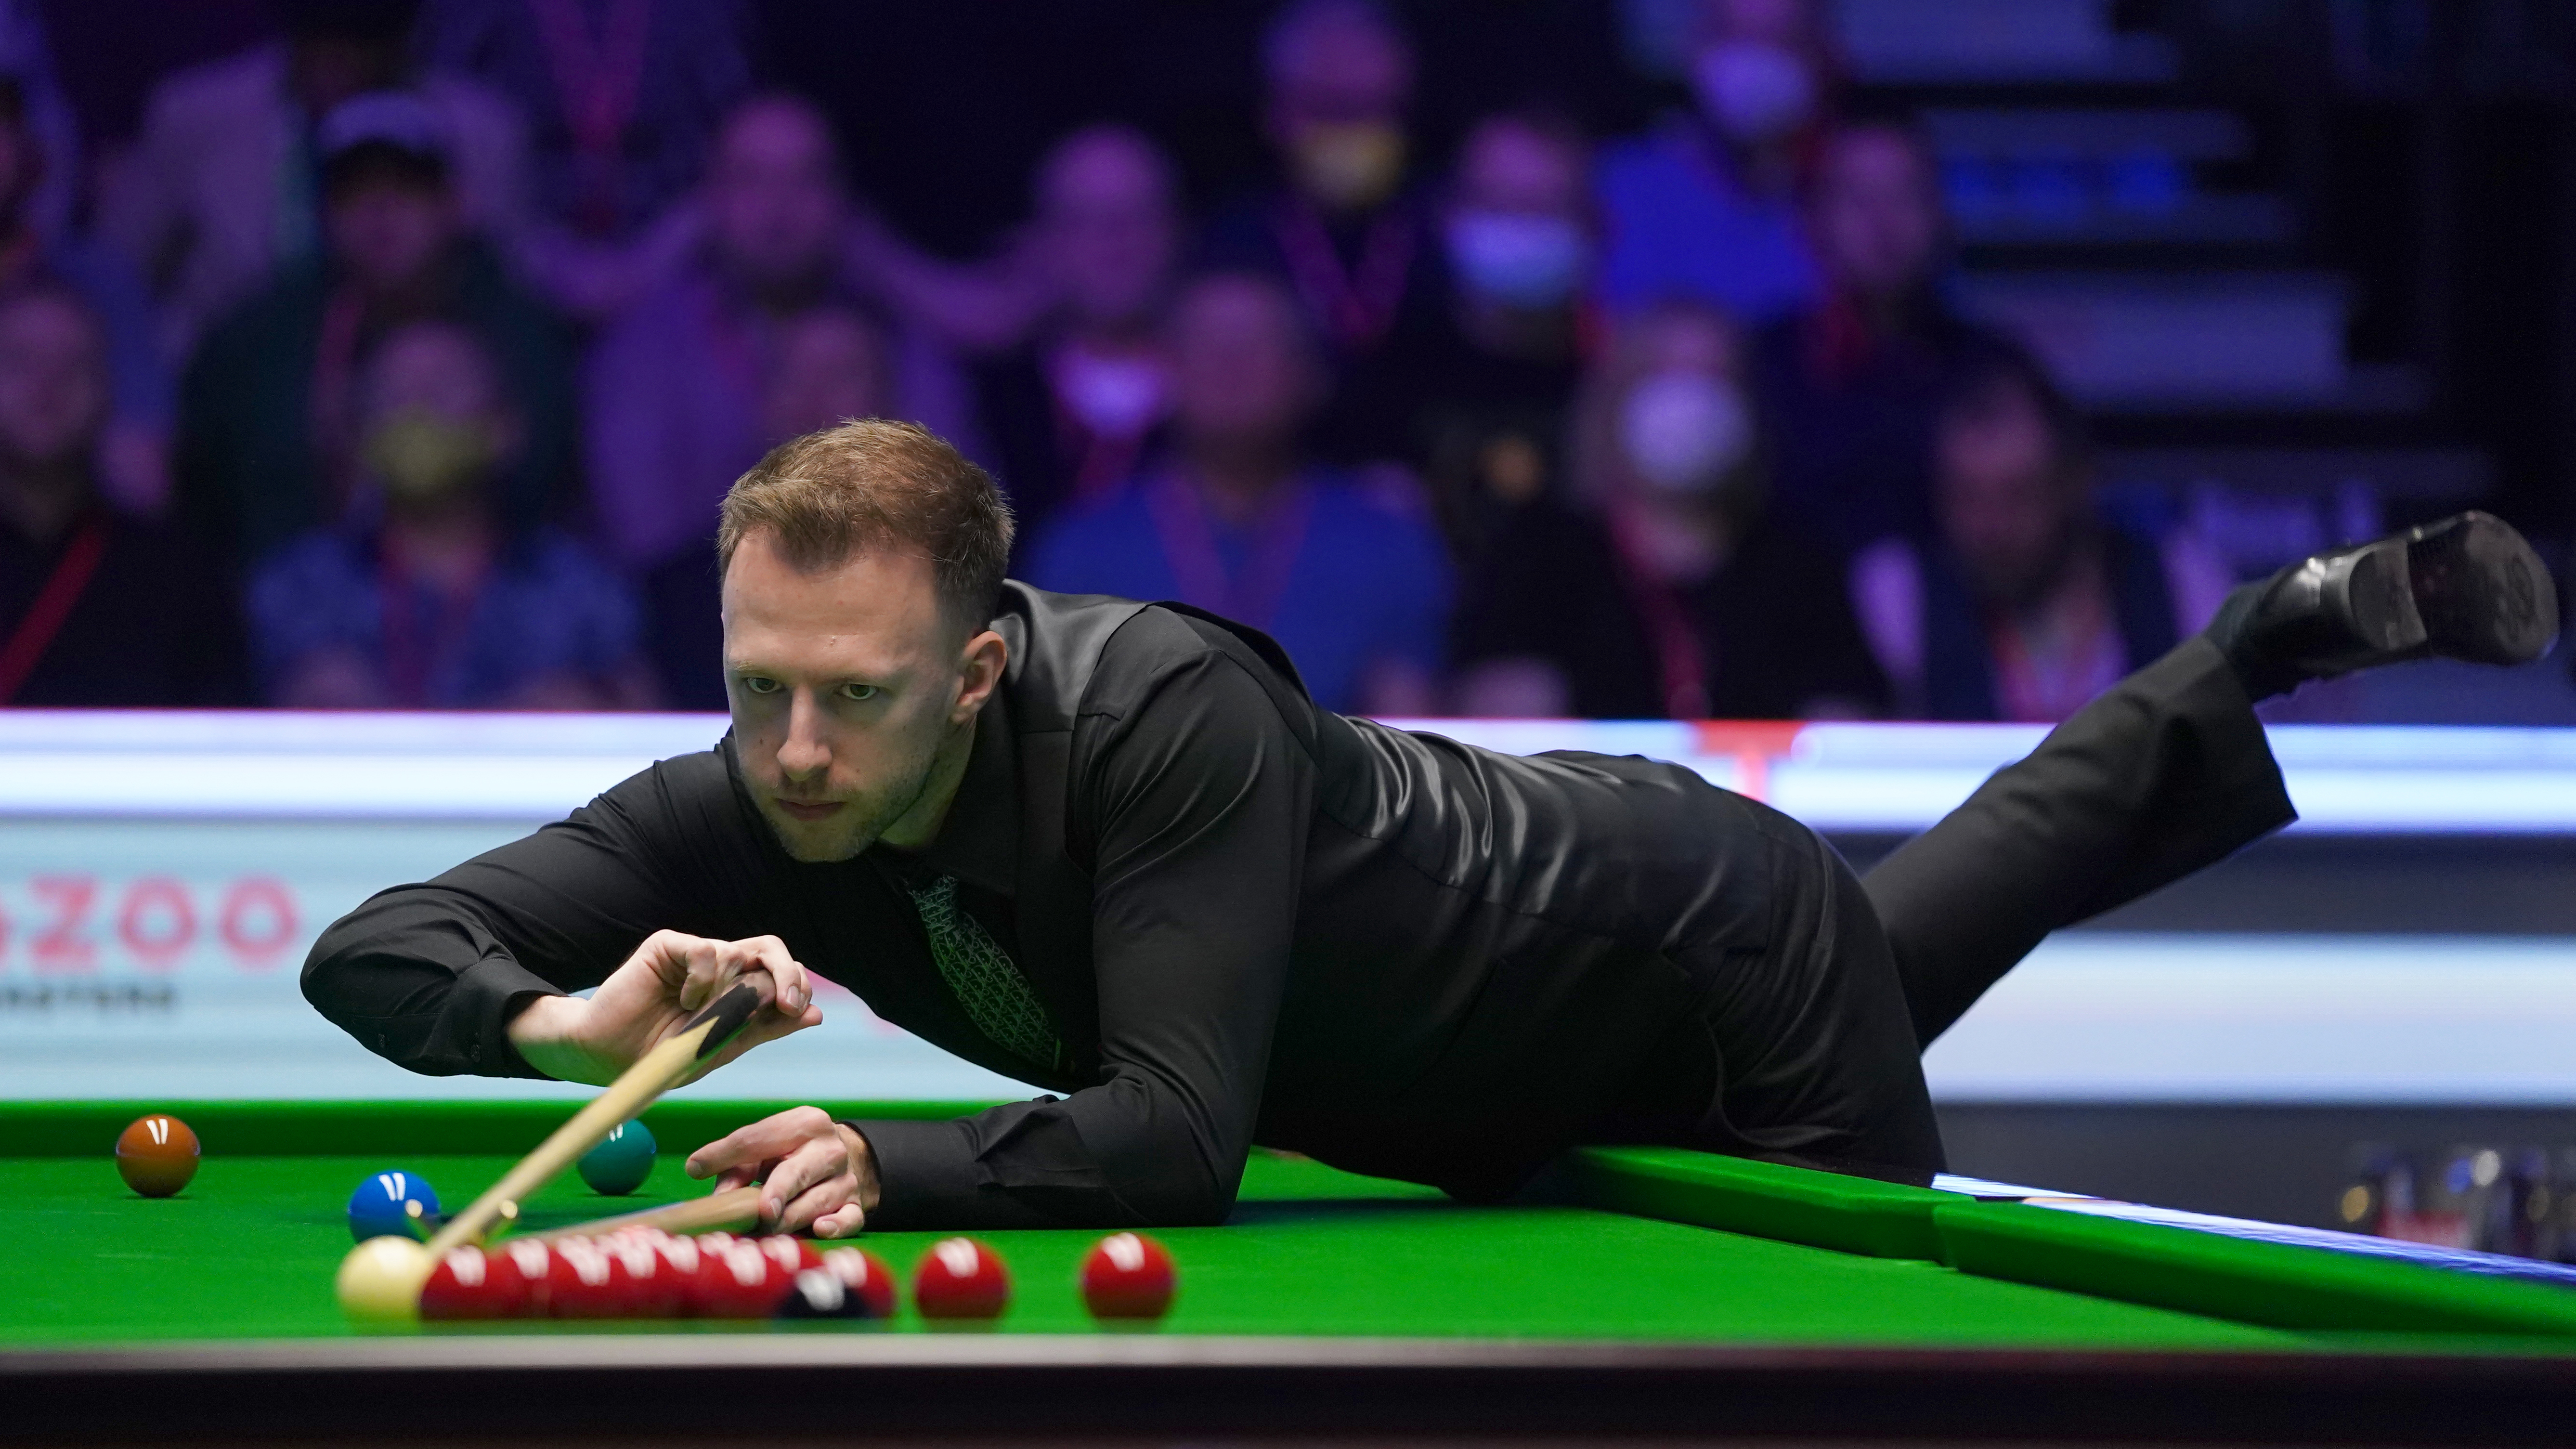 Snooker results Judd Trump beats Mark Selby 6-3 to reach Champion of Champions final